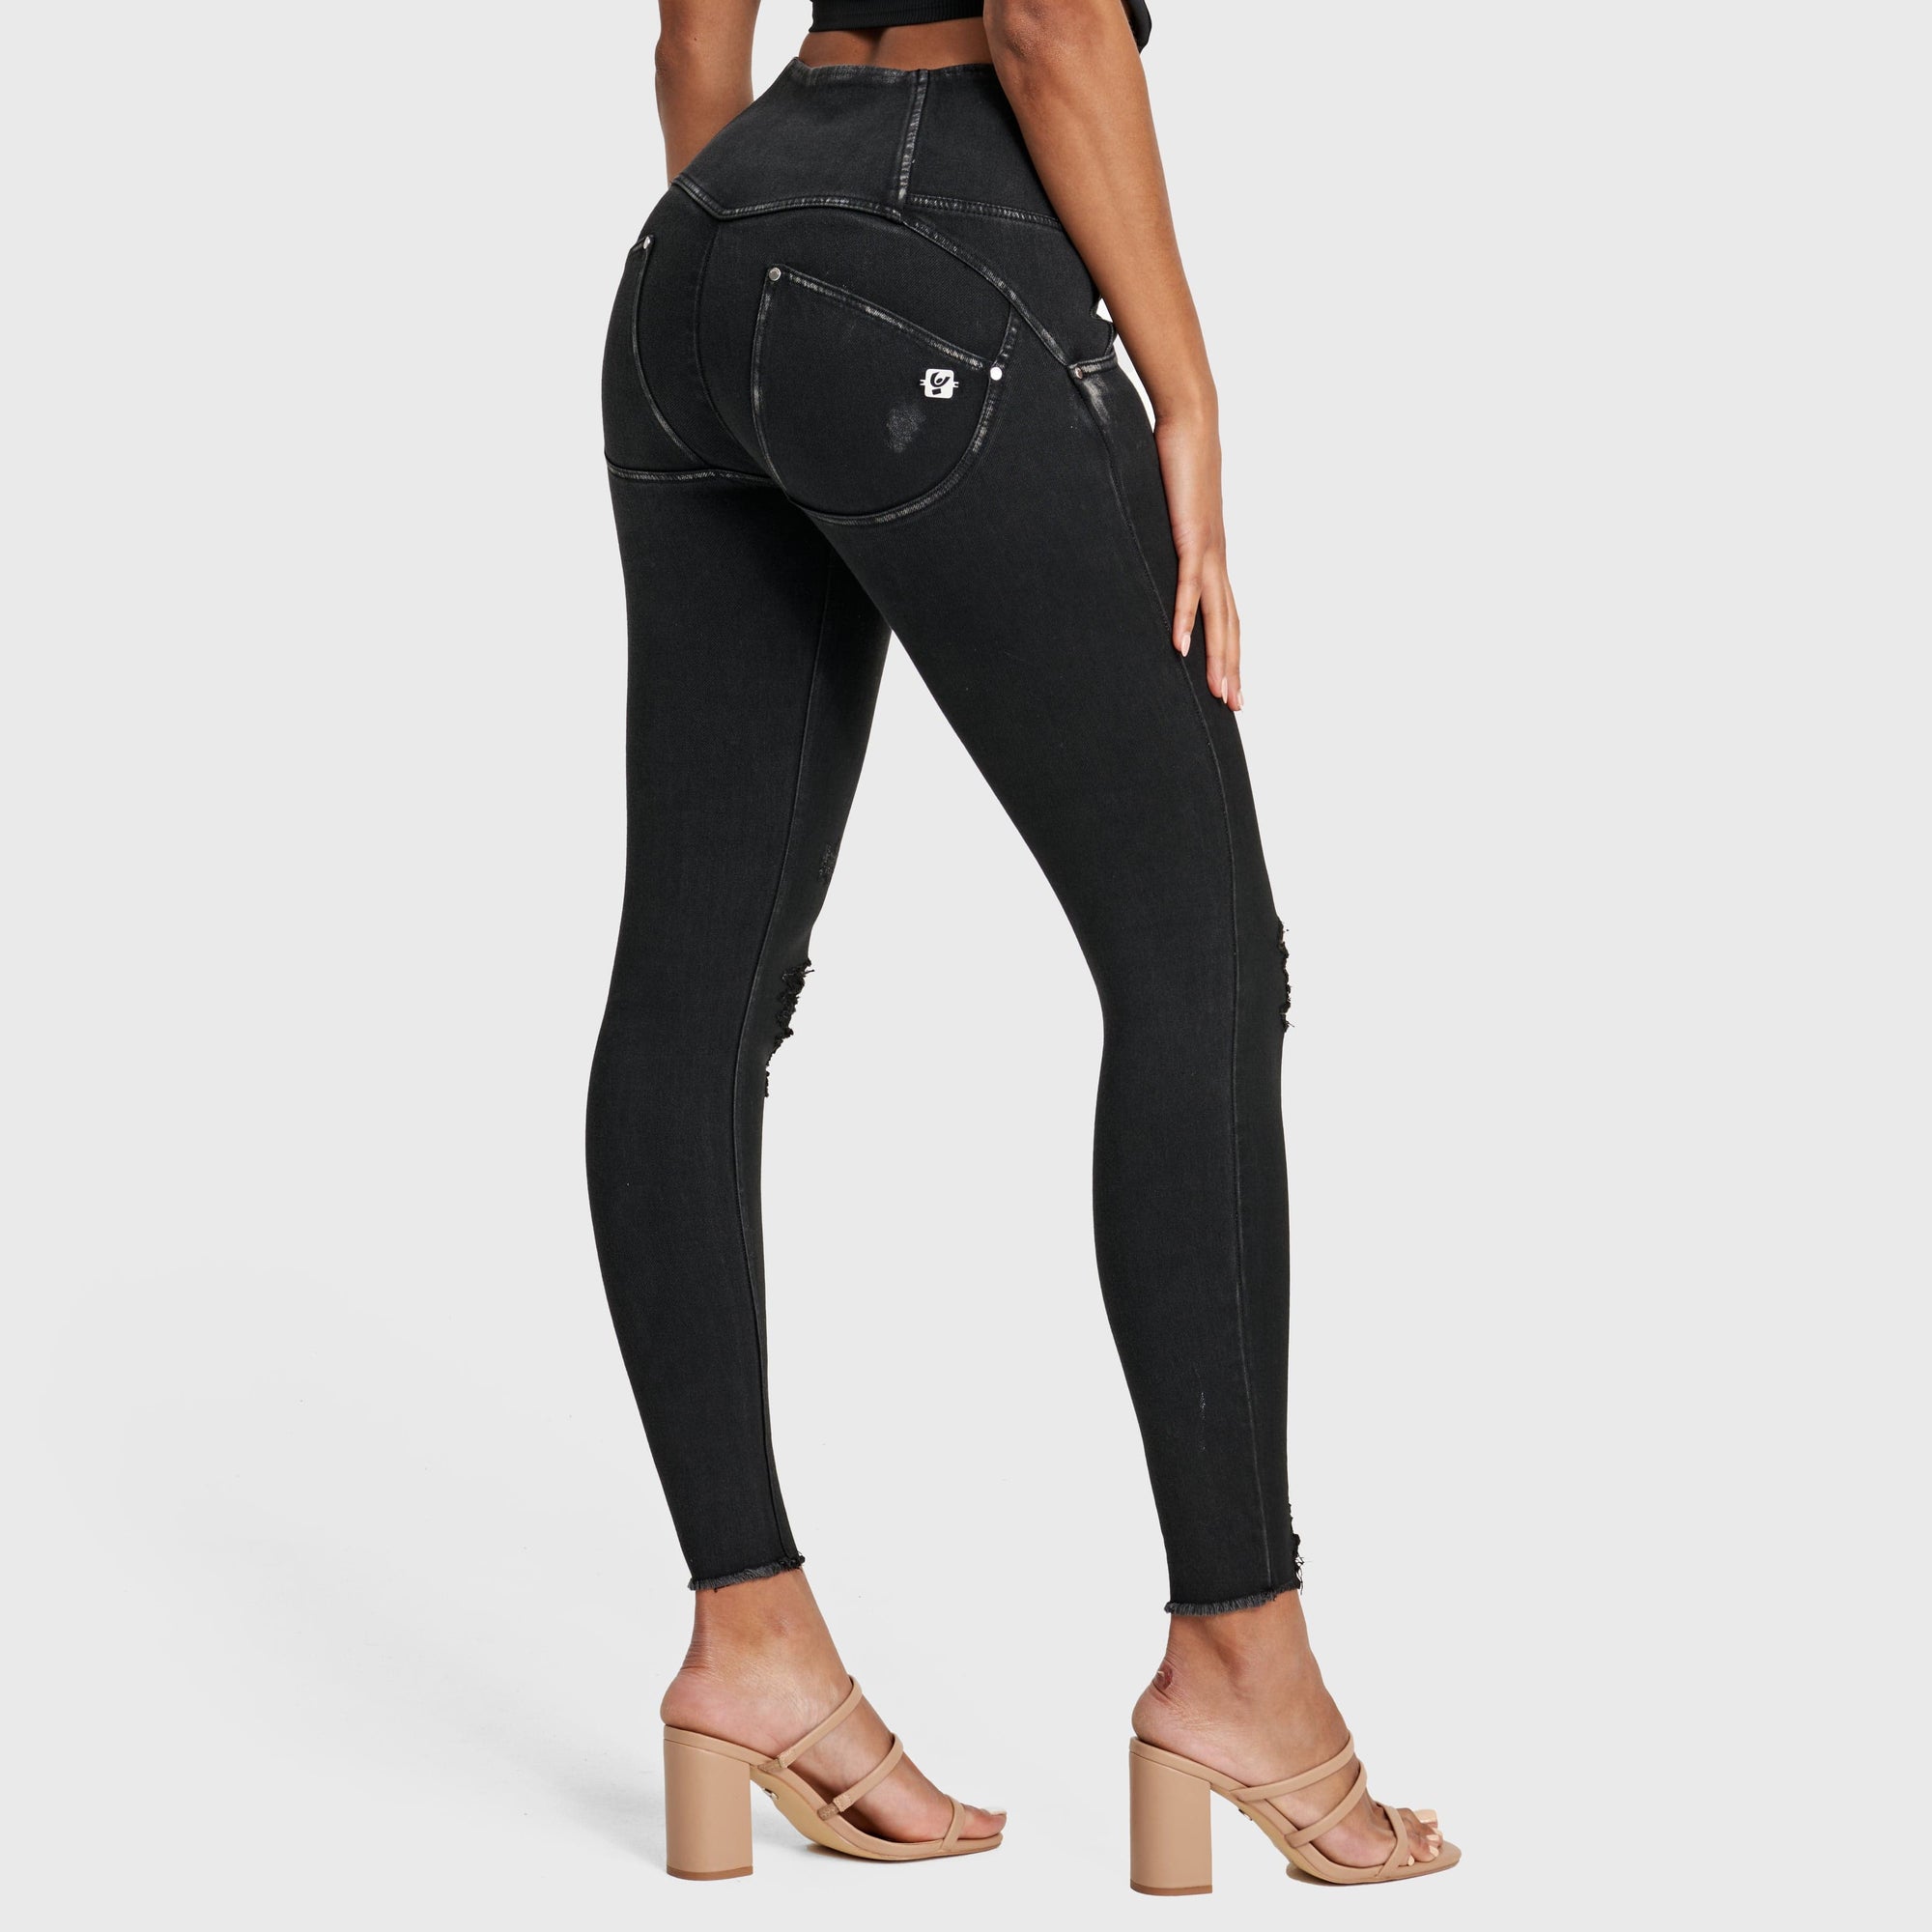 WR.UP® Snug Ripped Jeans - High Waisted - Full Length - Coated Black + Black Stitching